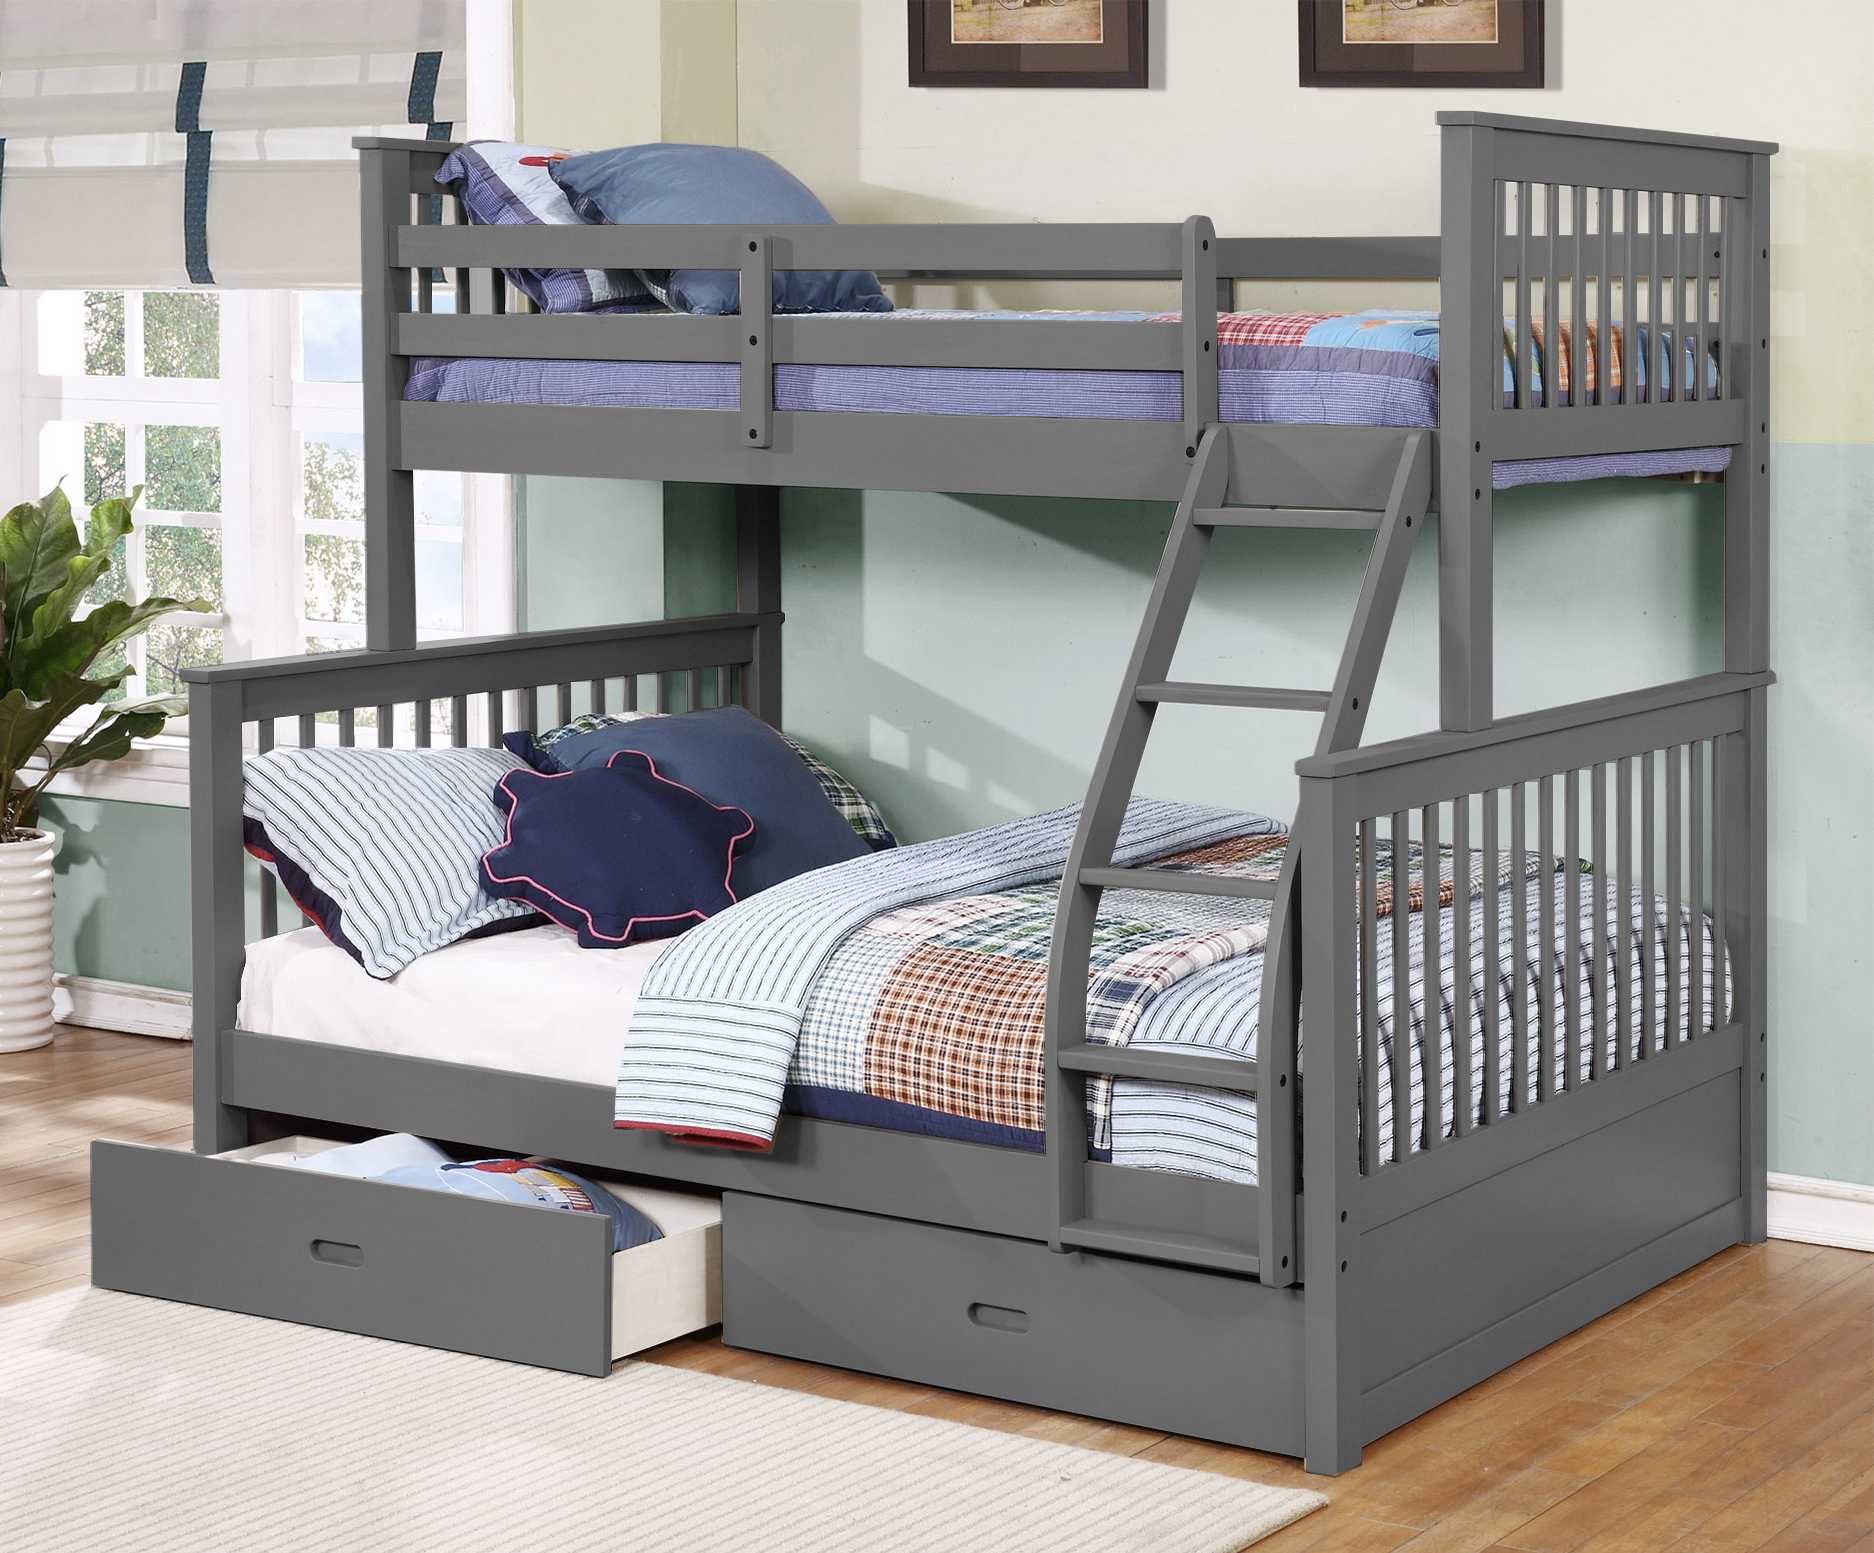 80.5" X 41.5-57.5" X 70.25" Grey Manufactured Wood and Solid Wood Twin or Full Bunk Bed with 2 Drawers